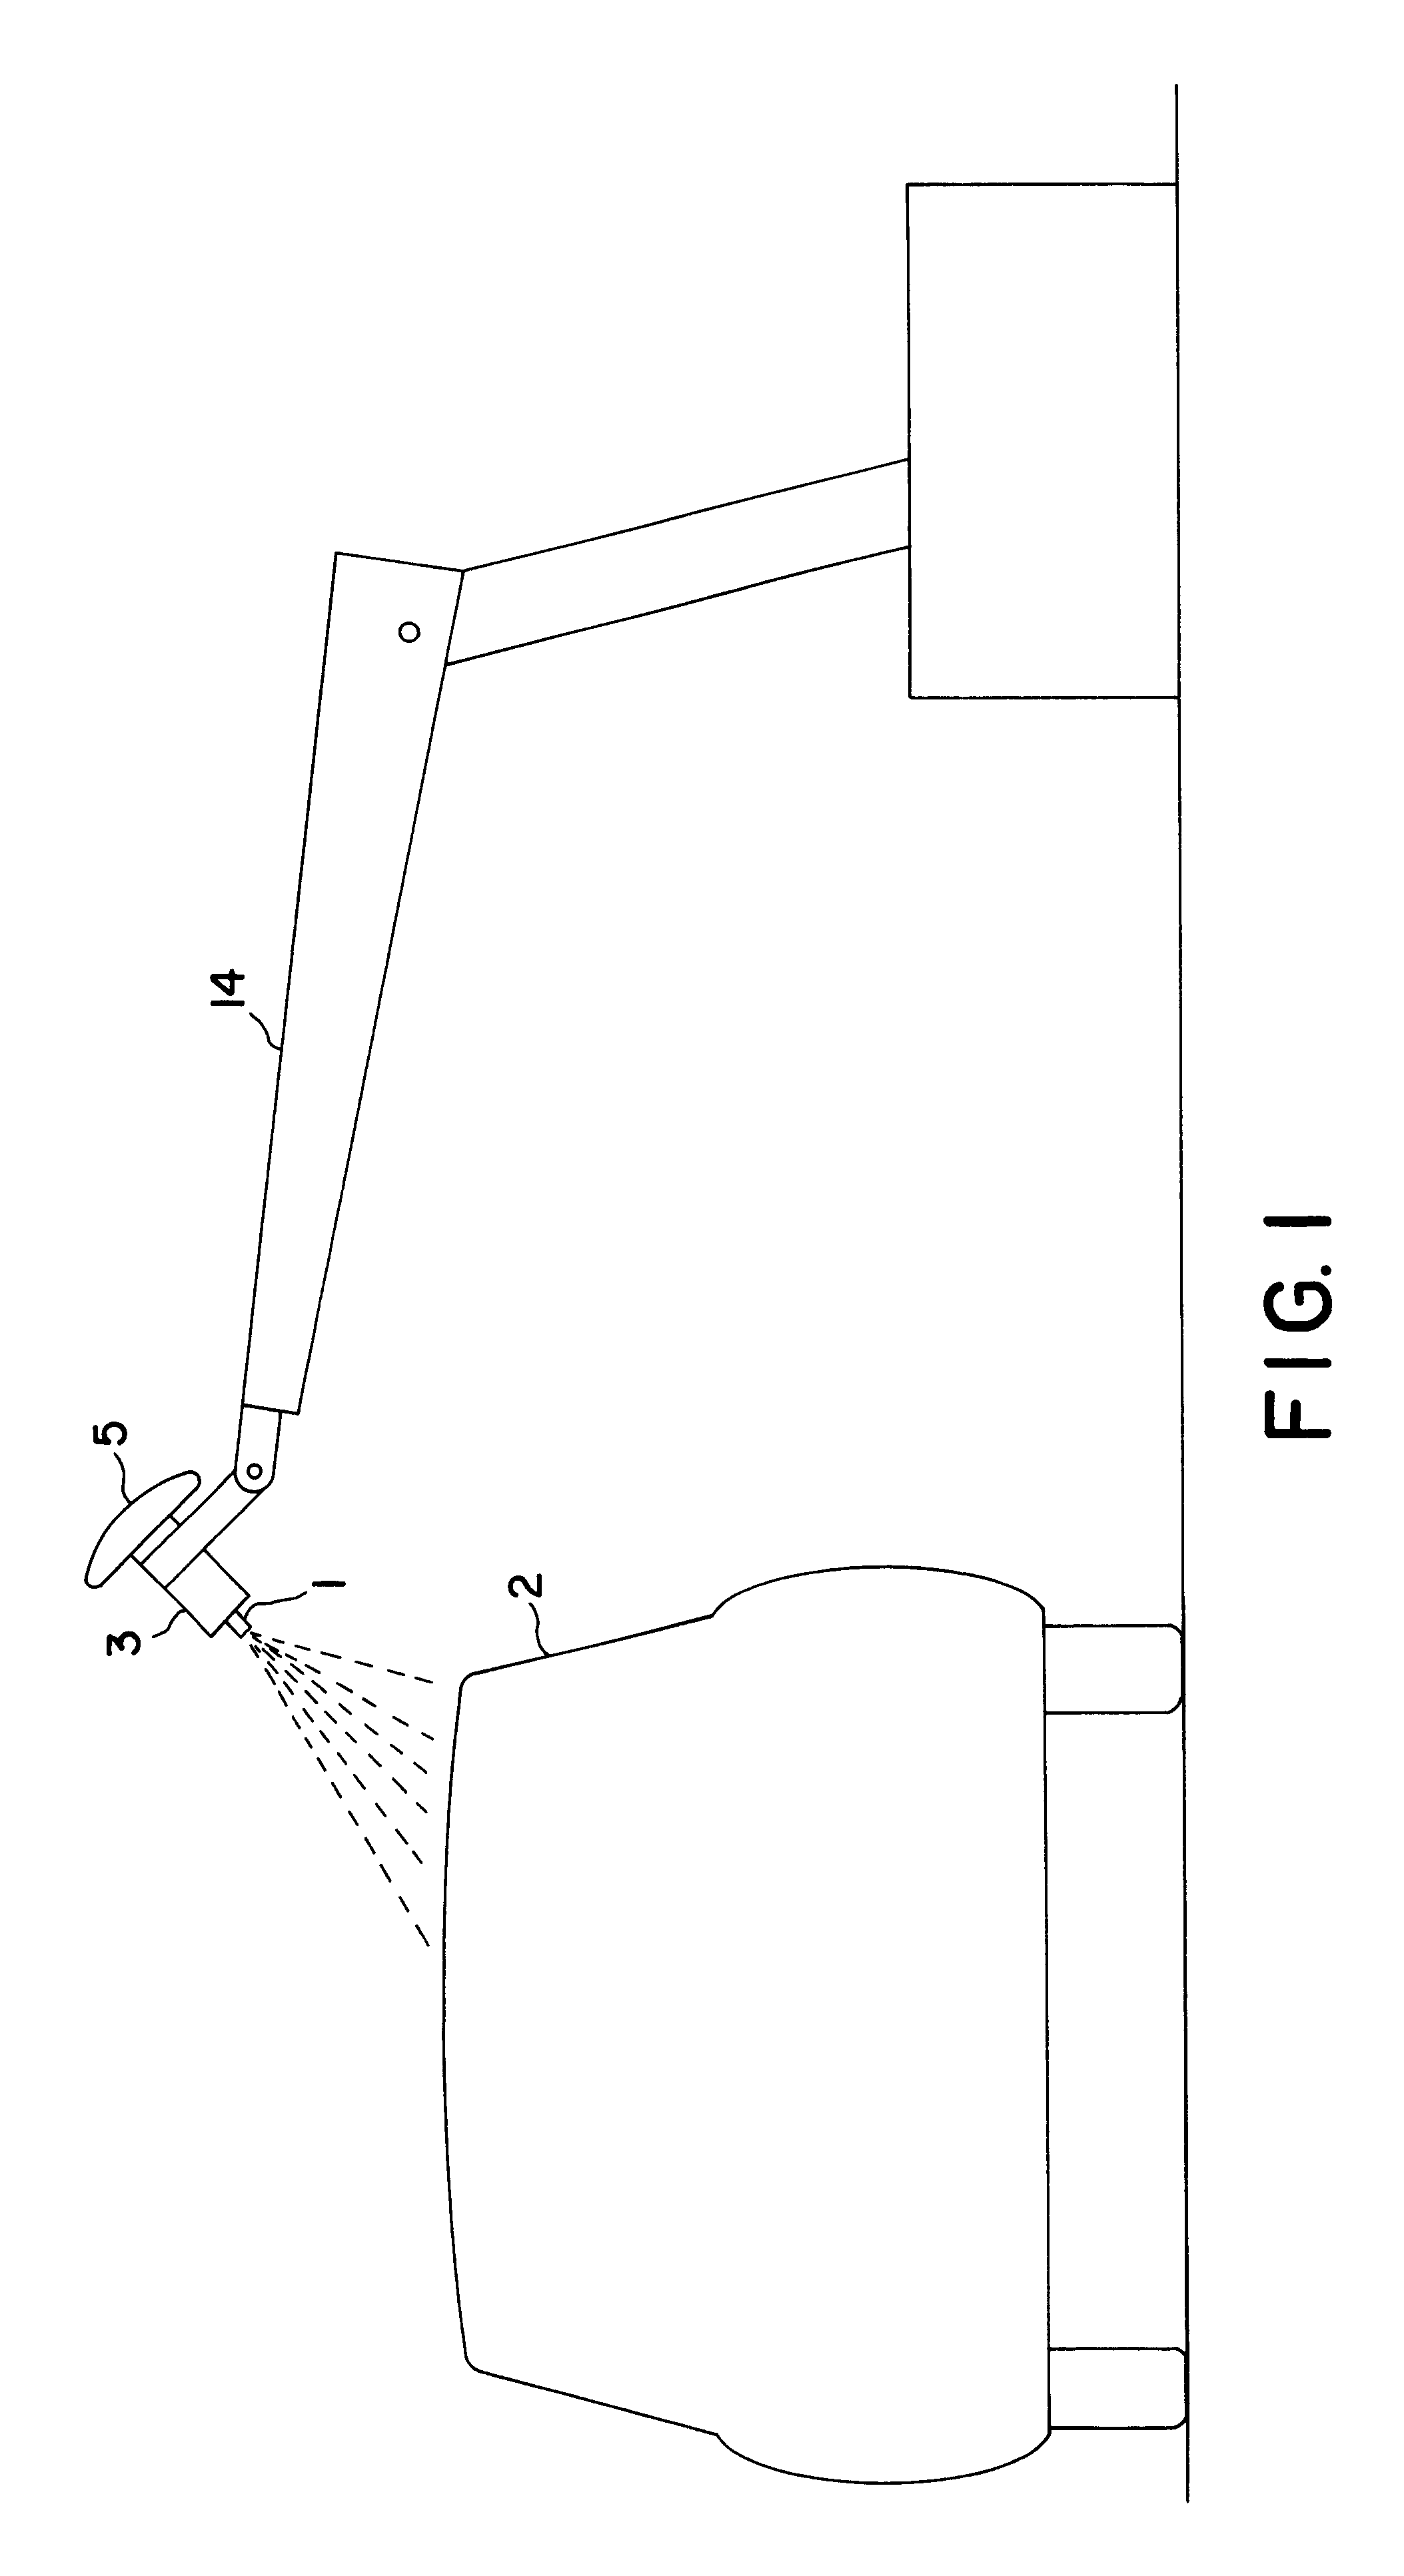 Plant for feeding paint to a spray application apparatus